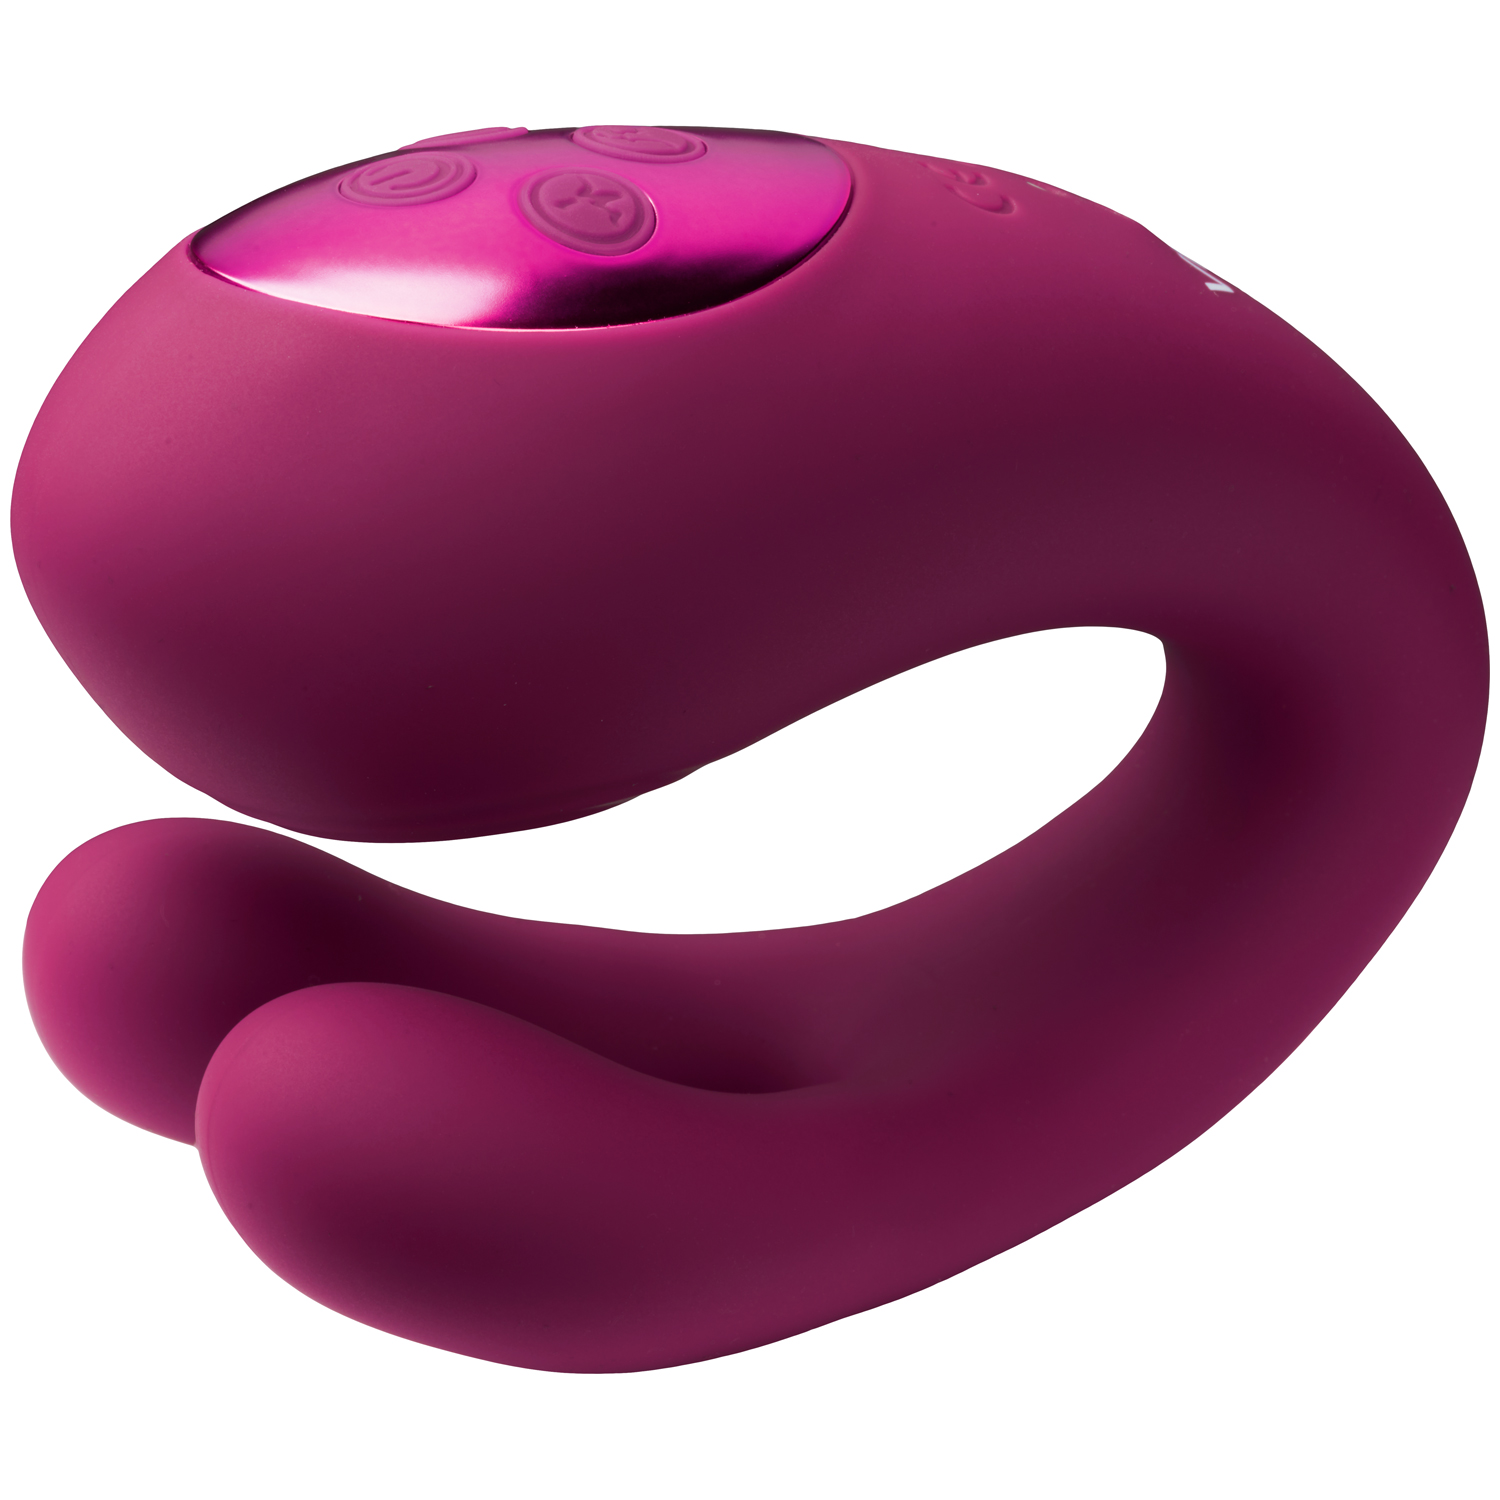 Vive Yoko Triple Action Vibrator with Clitoral Pulse Wave - Pink